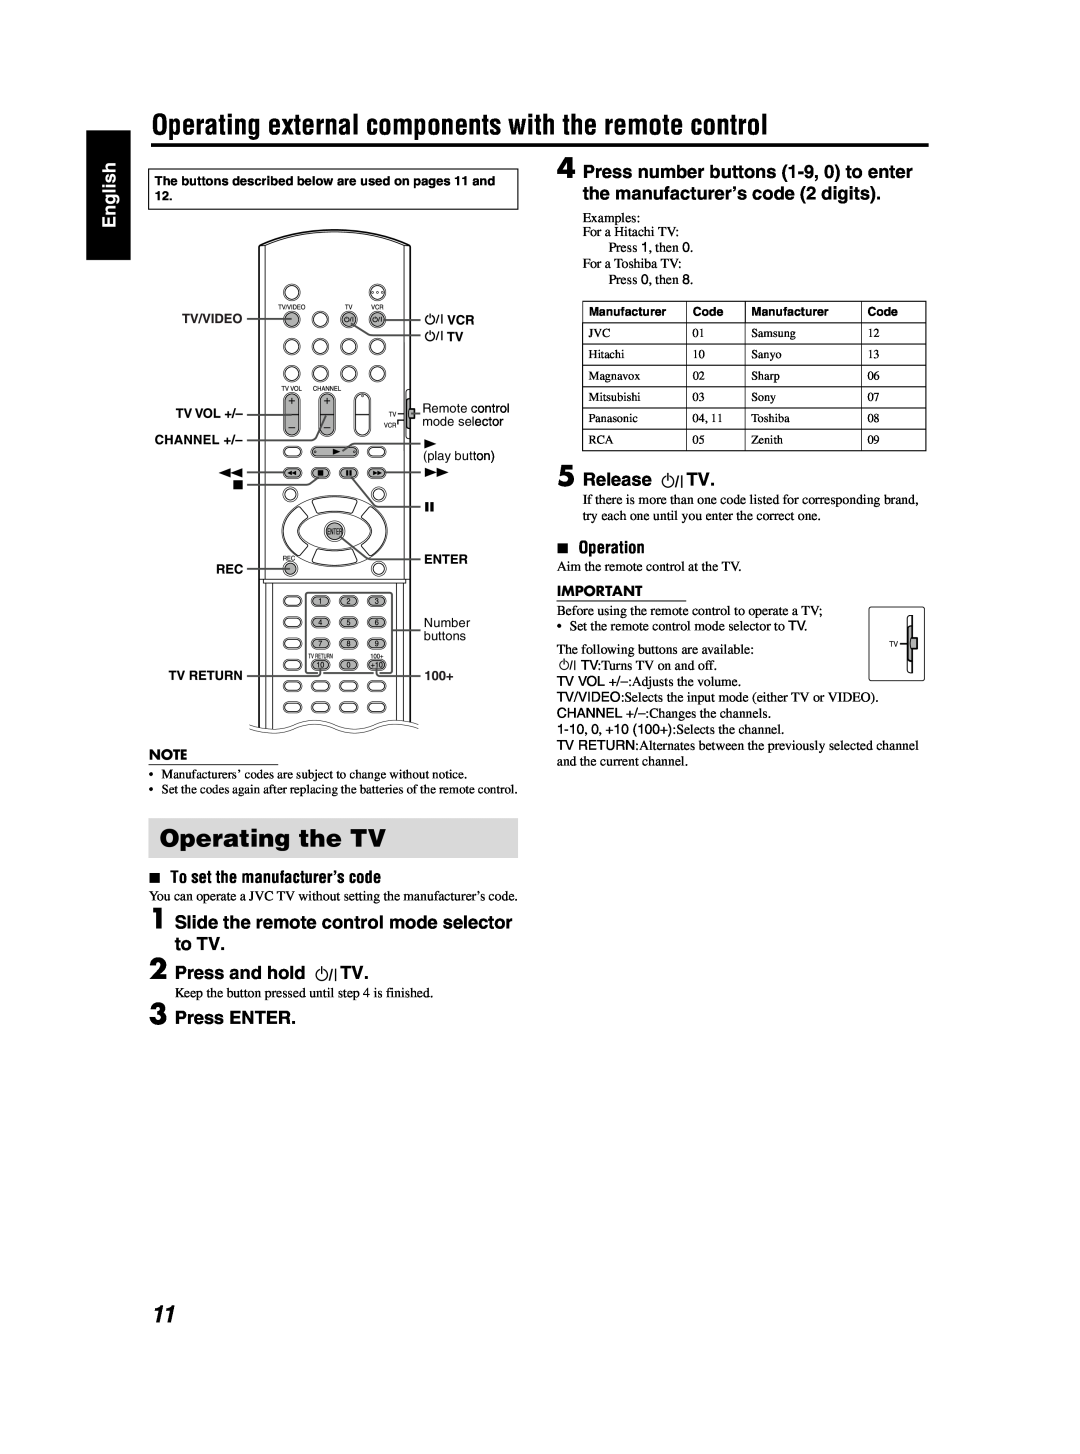 JVC TH-S2 manual Operating the TV, Slide the remote control mode selector to TV, Press and hold TV, Press ENTER, Release TV 